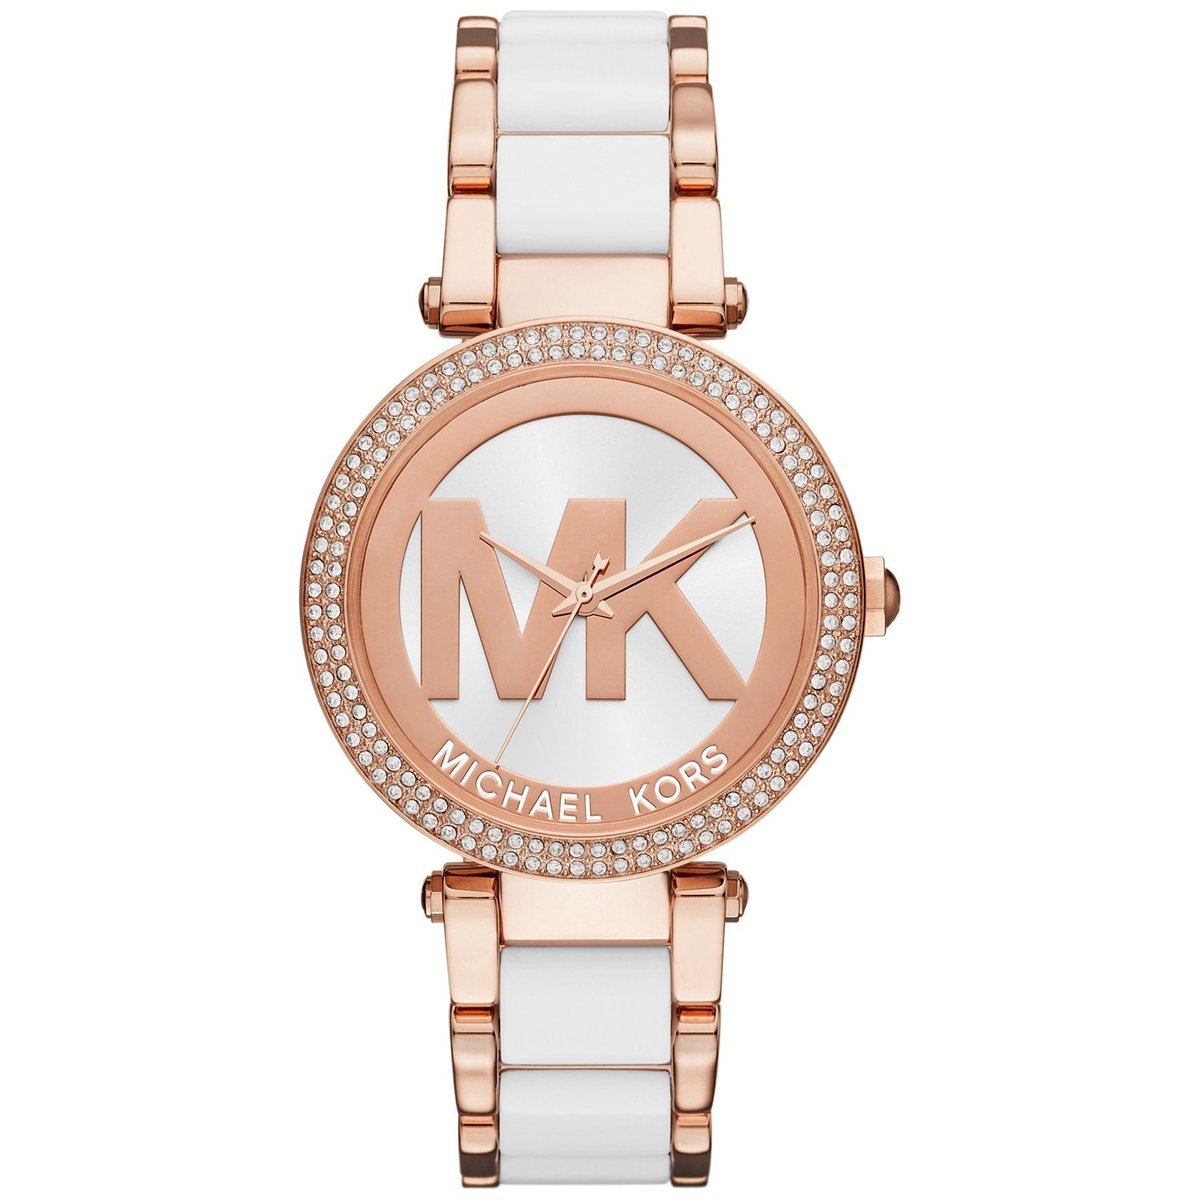 Michael Kors Parker Rose Gold and Silver Ladies Watch MK6314   showtimewatchescom